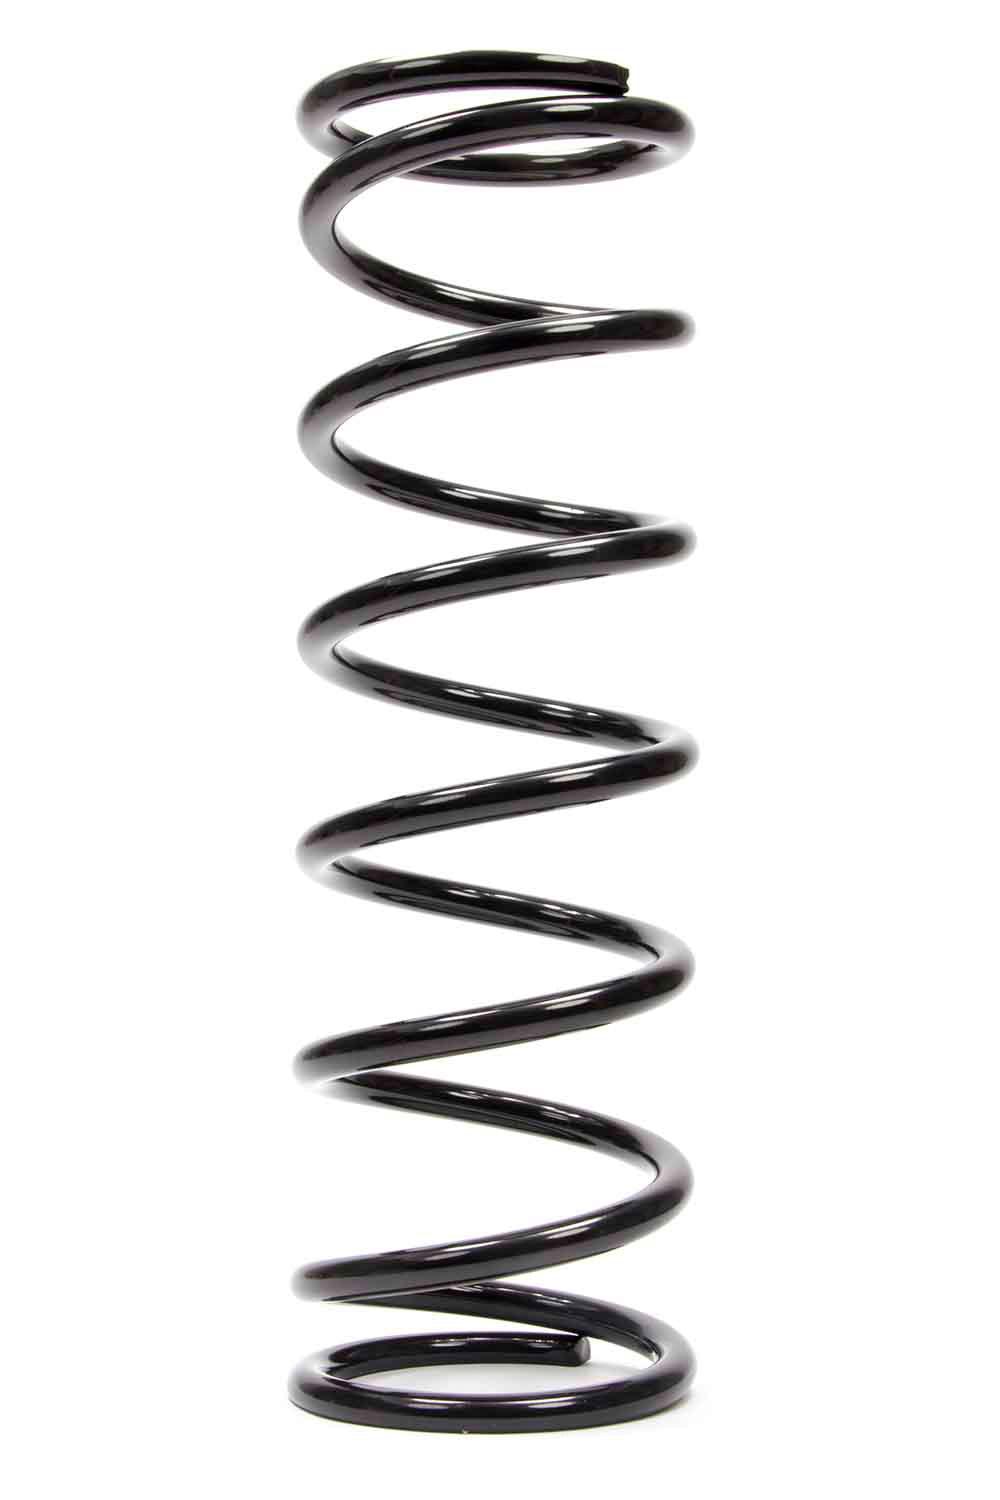 Conv Rear Spring 5in x 16in x 175 - Burlile Performance Products